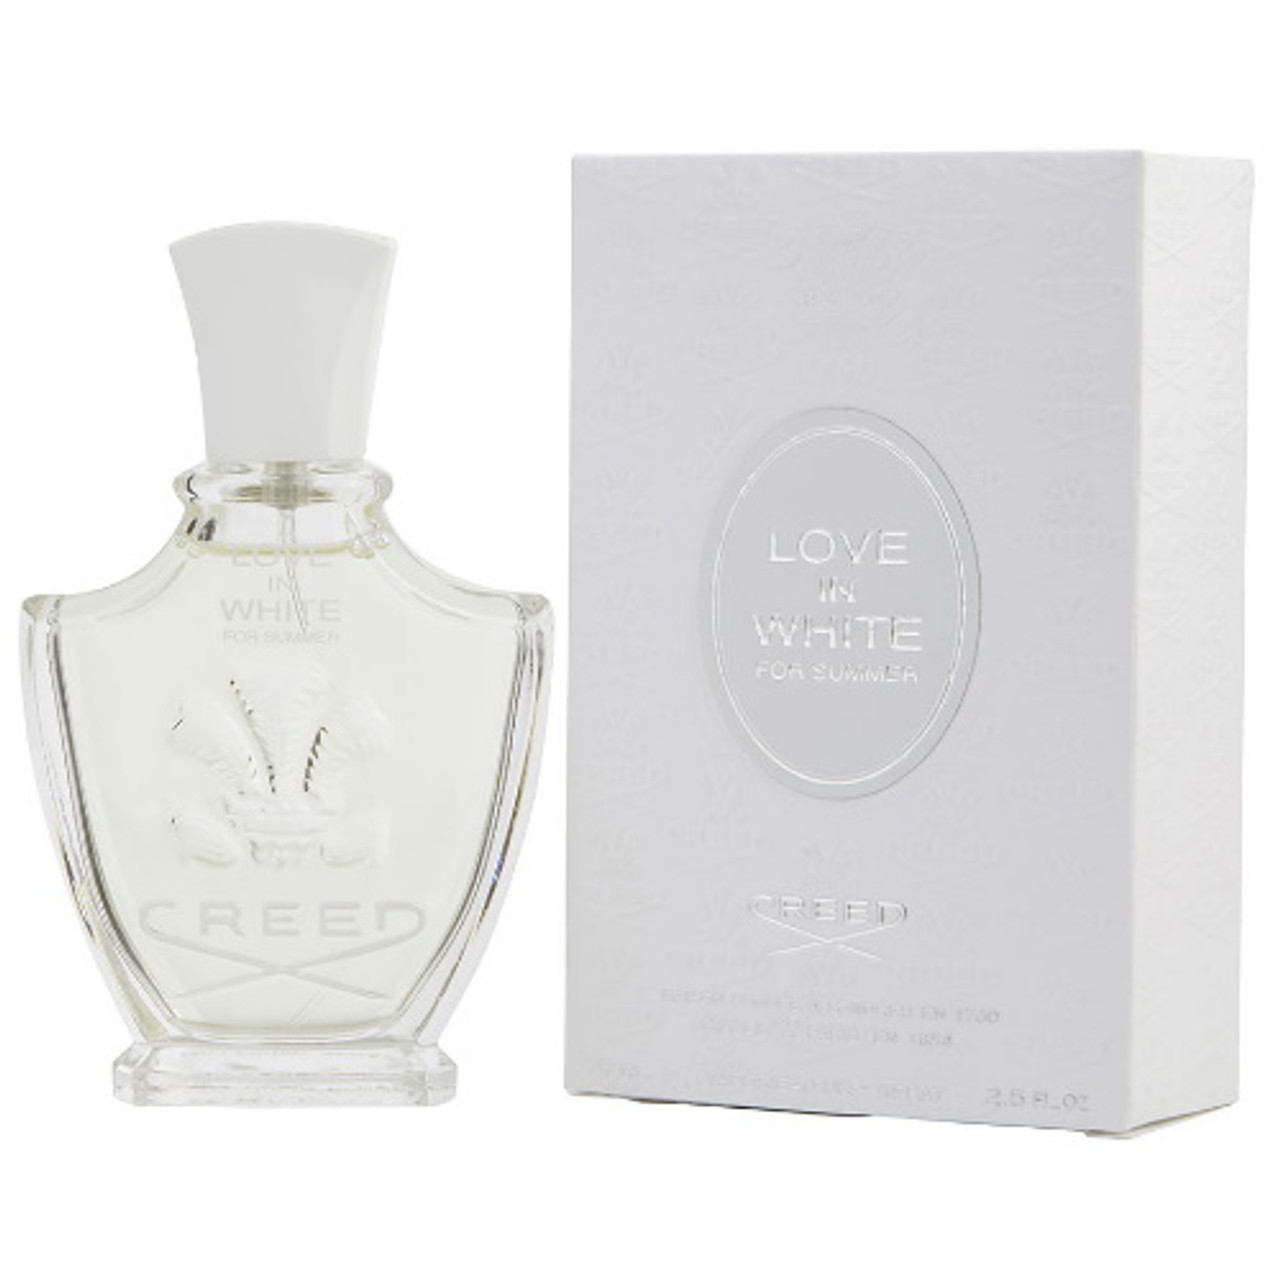 Creed Love oz EDP for by - Summer for in 2.5 ForeverLux women Creed White